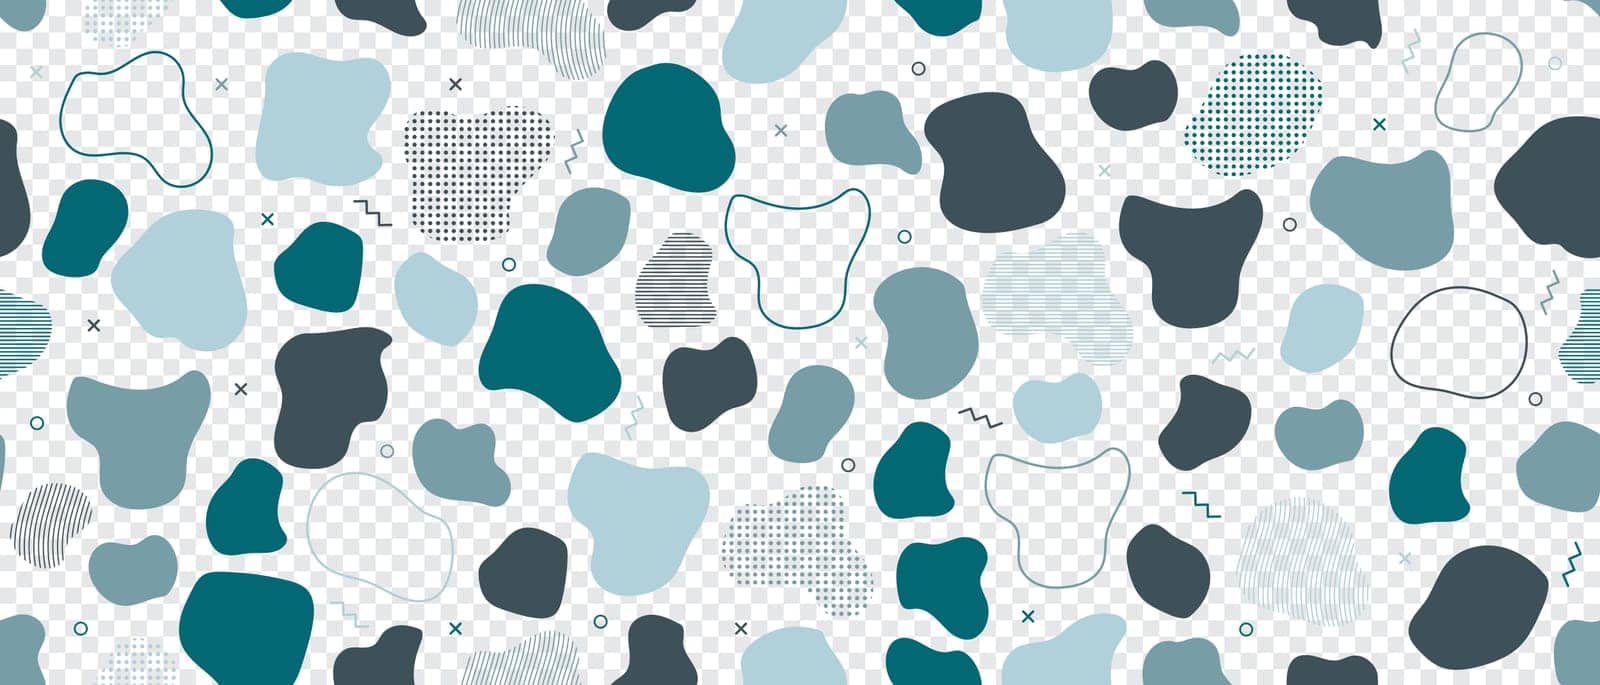 Abstract blob seamless pattern. Abstract blotch shape. Liquid shape elements. Fluid dynamical colored forms banner. Liquid shape elements. Vector illustration by Aozora